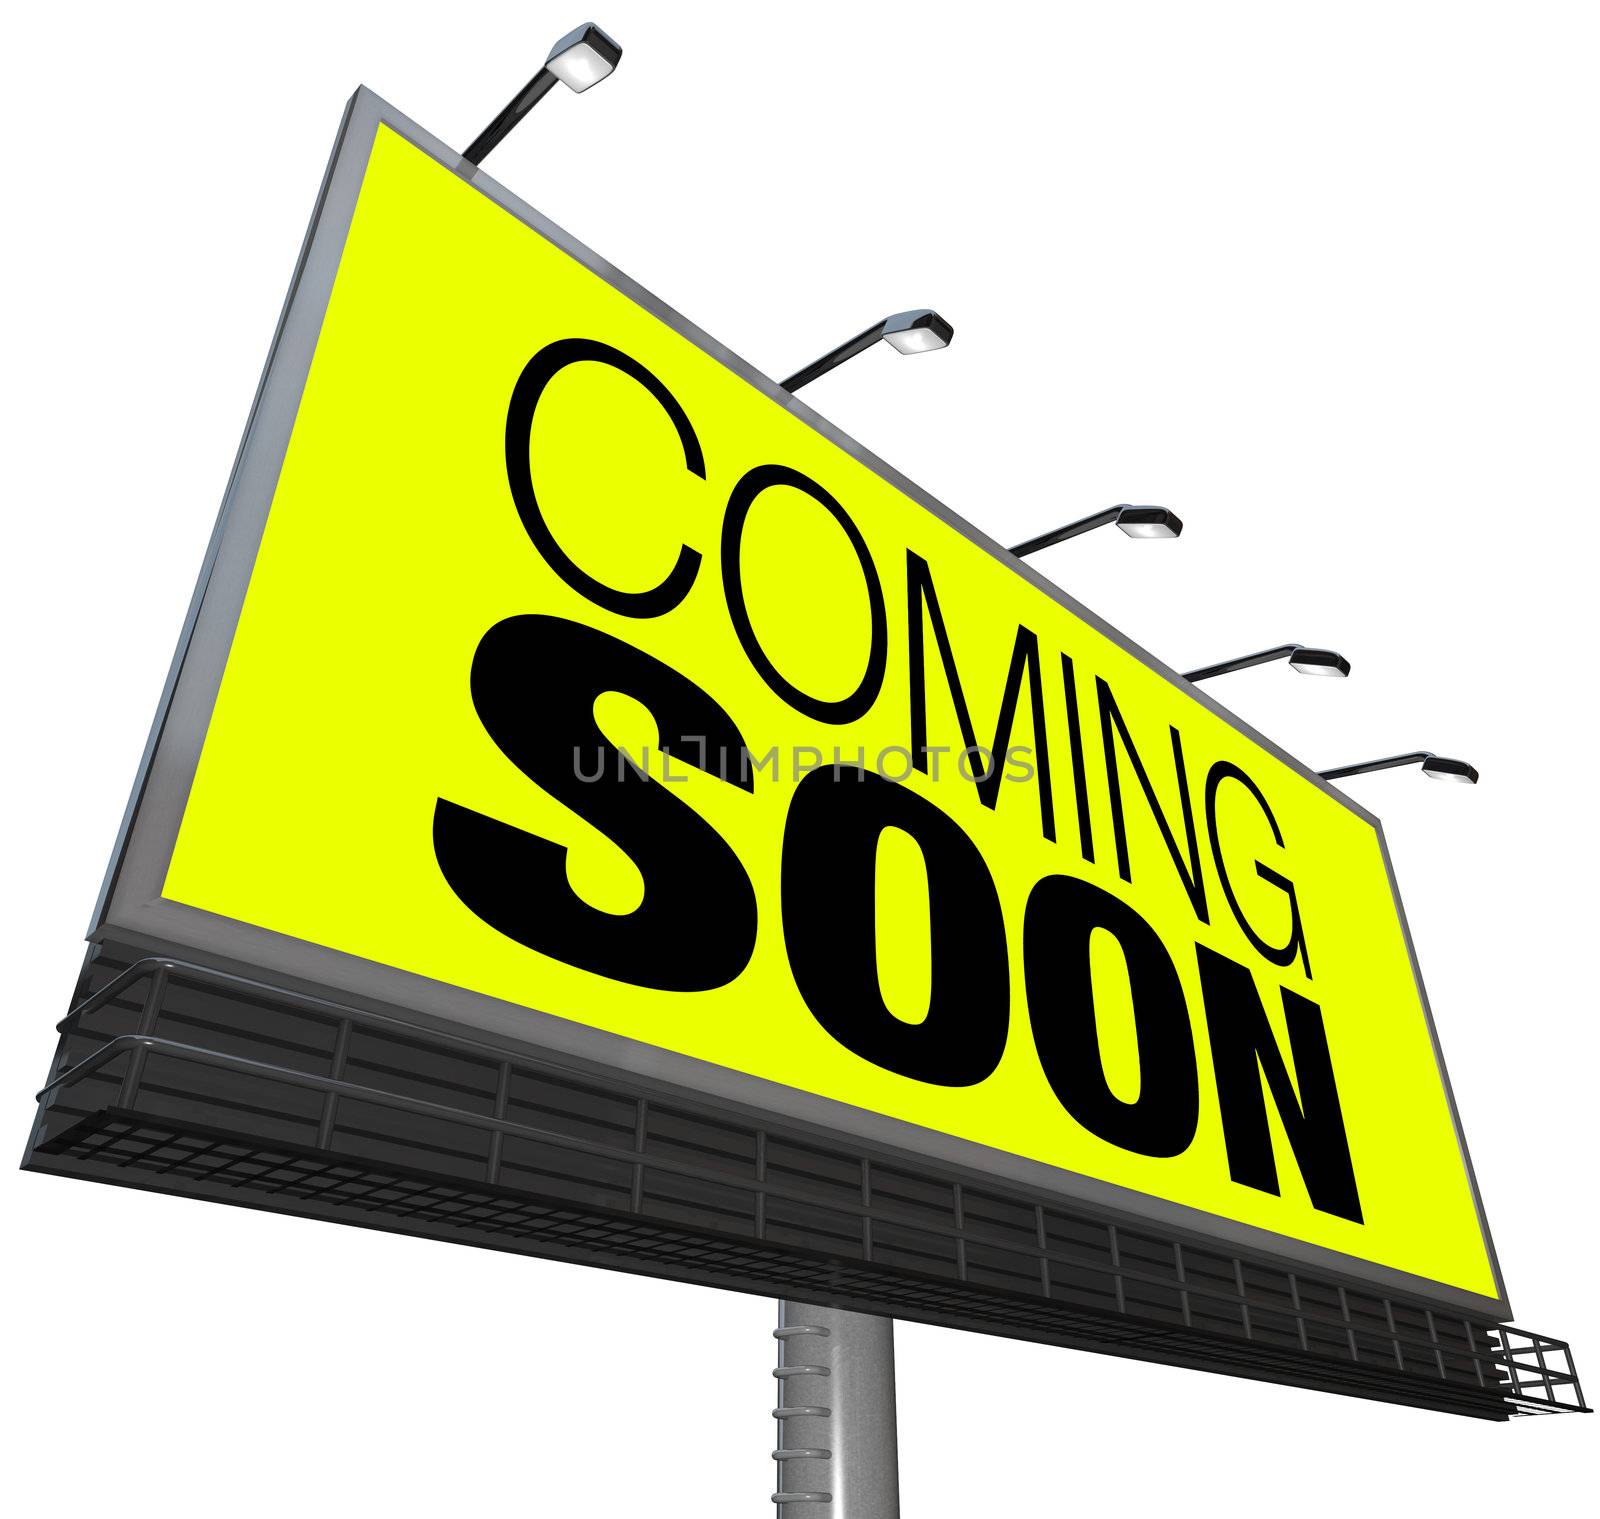 Coming Soon Billboard Announces New Opening Store Event by iQoncept